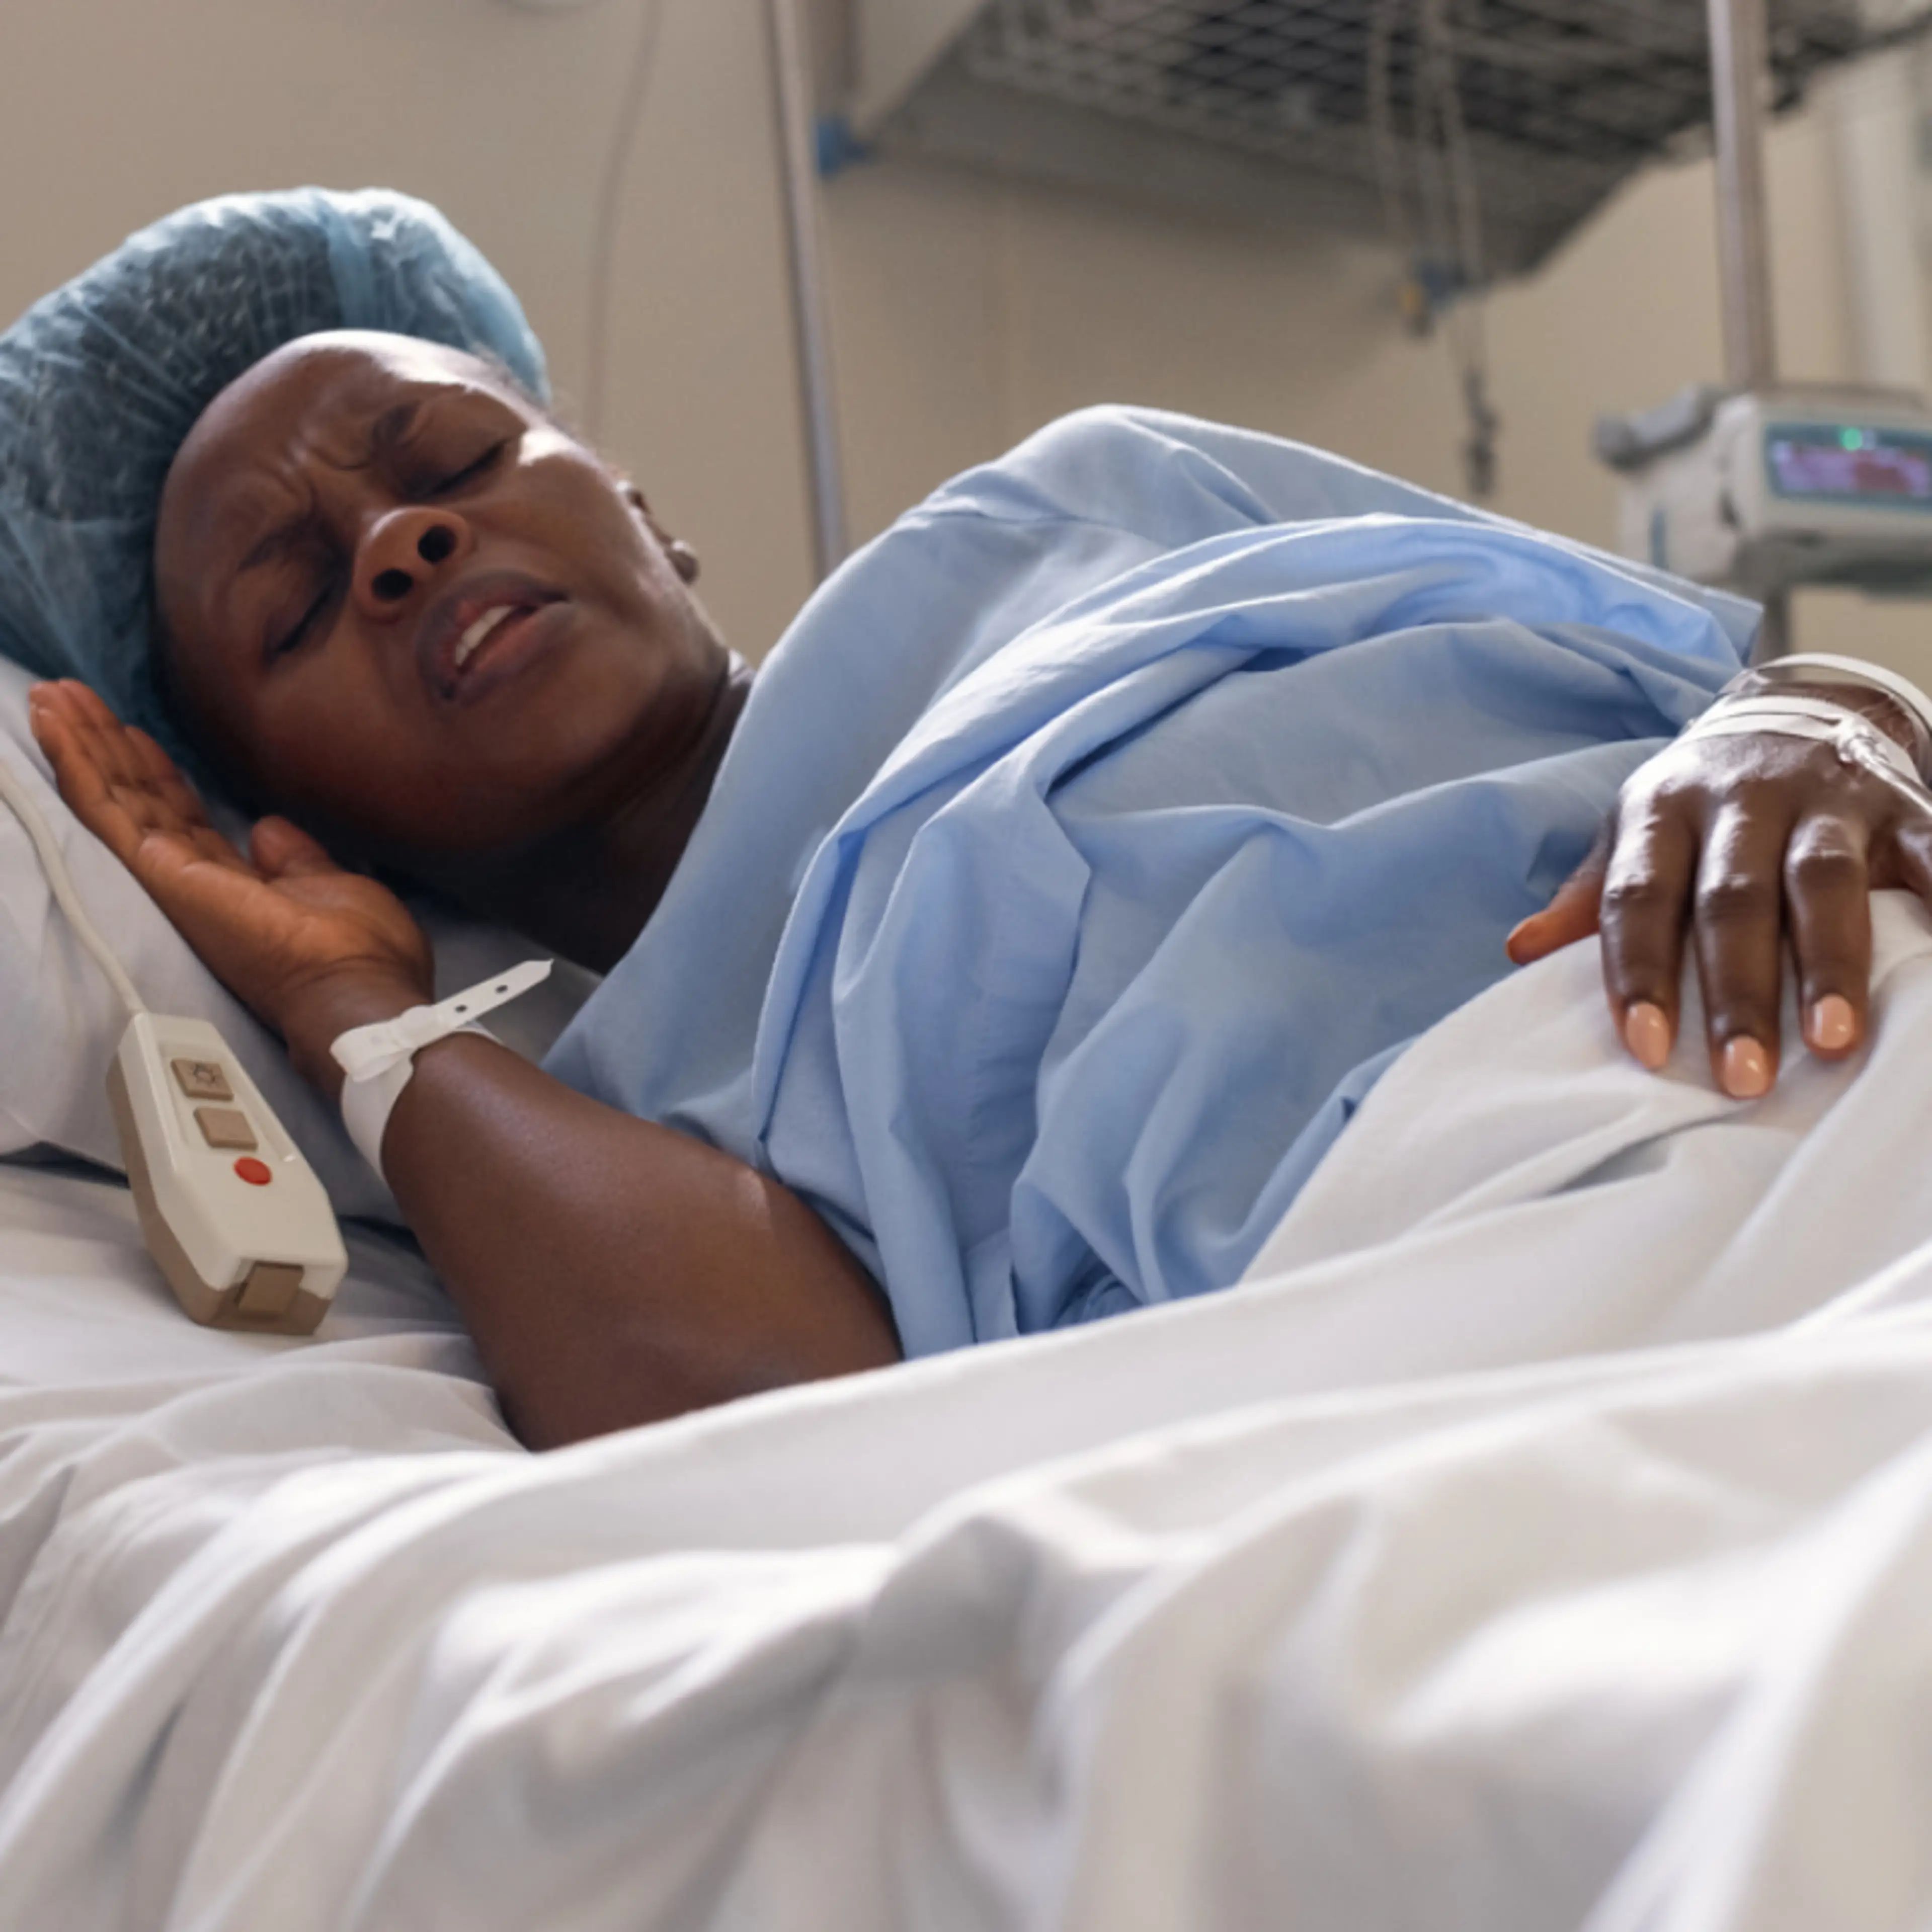 Everything You Need to Know Before Getting an Epidural